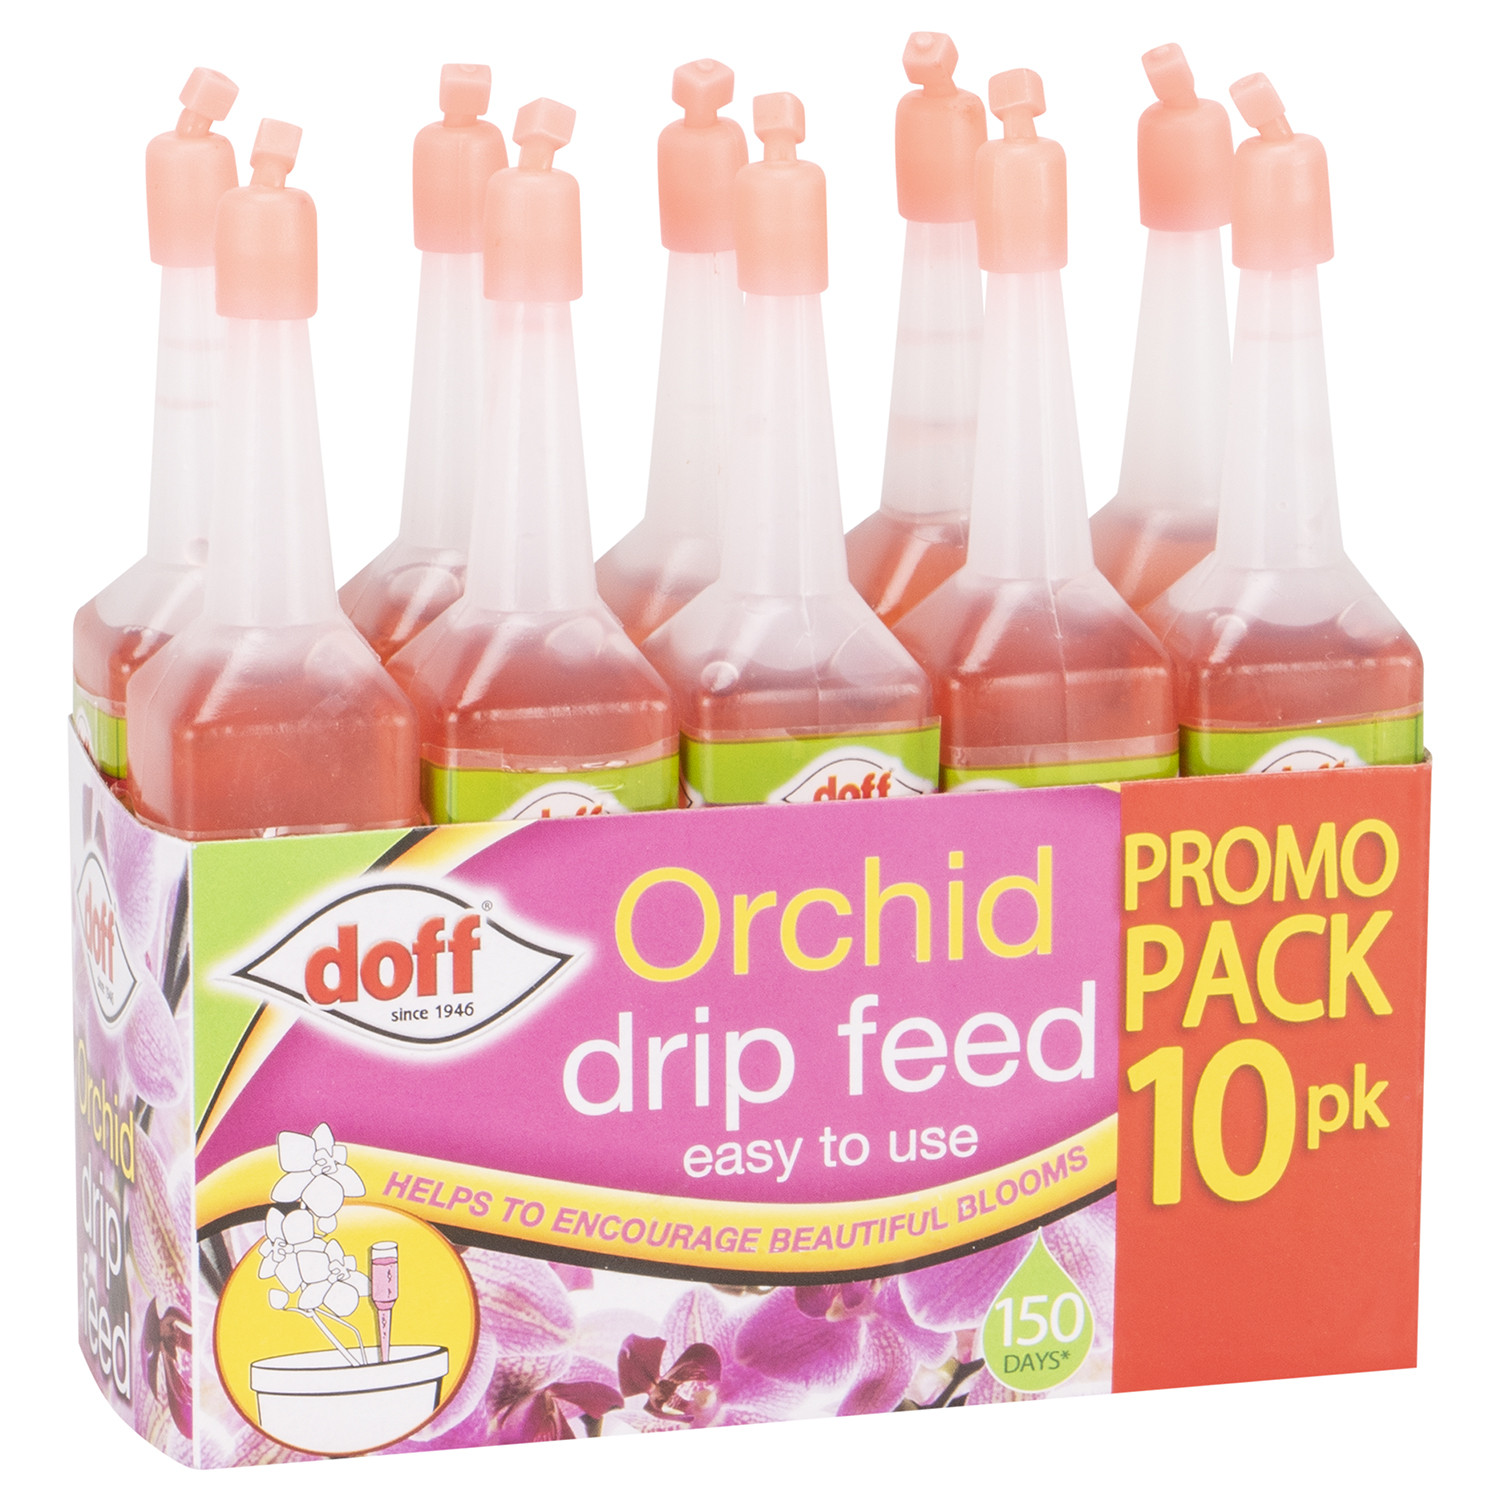 Doff Orchid Drip Feeders 10 Pack Image